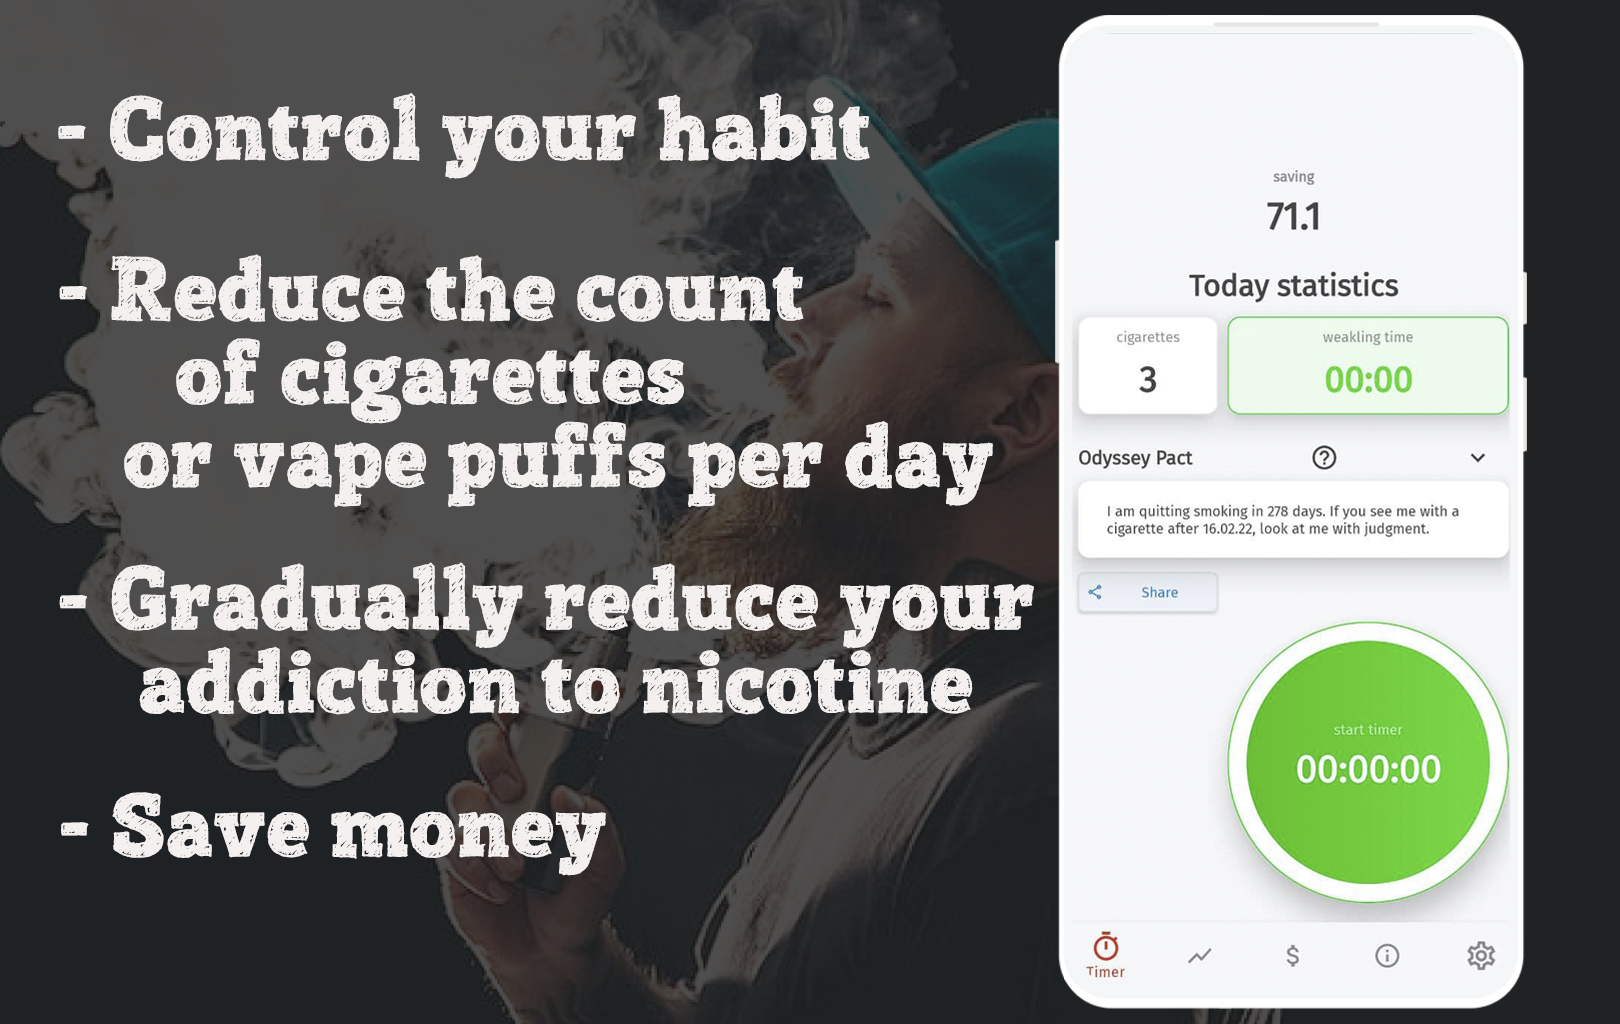 sway-quit-less-smoking-or-vaping - Reduce your dependence (interval extension method)